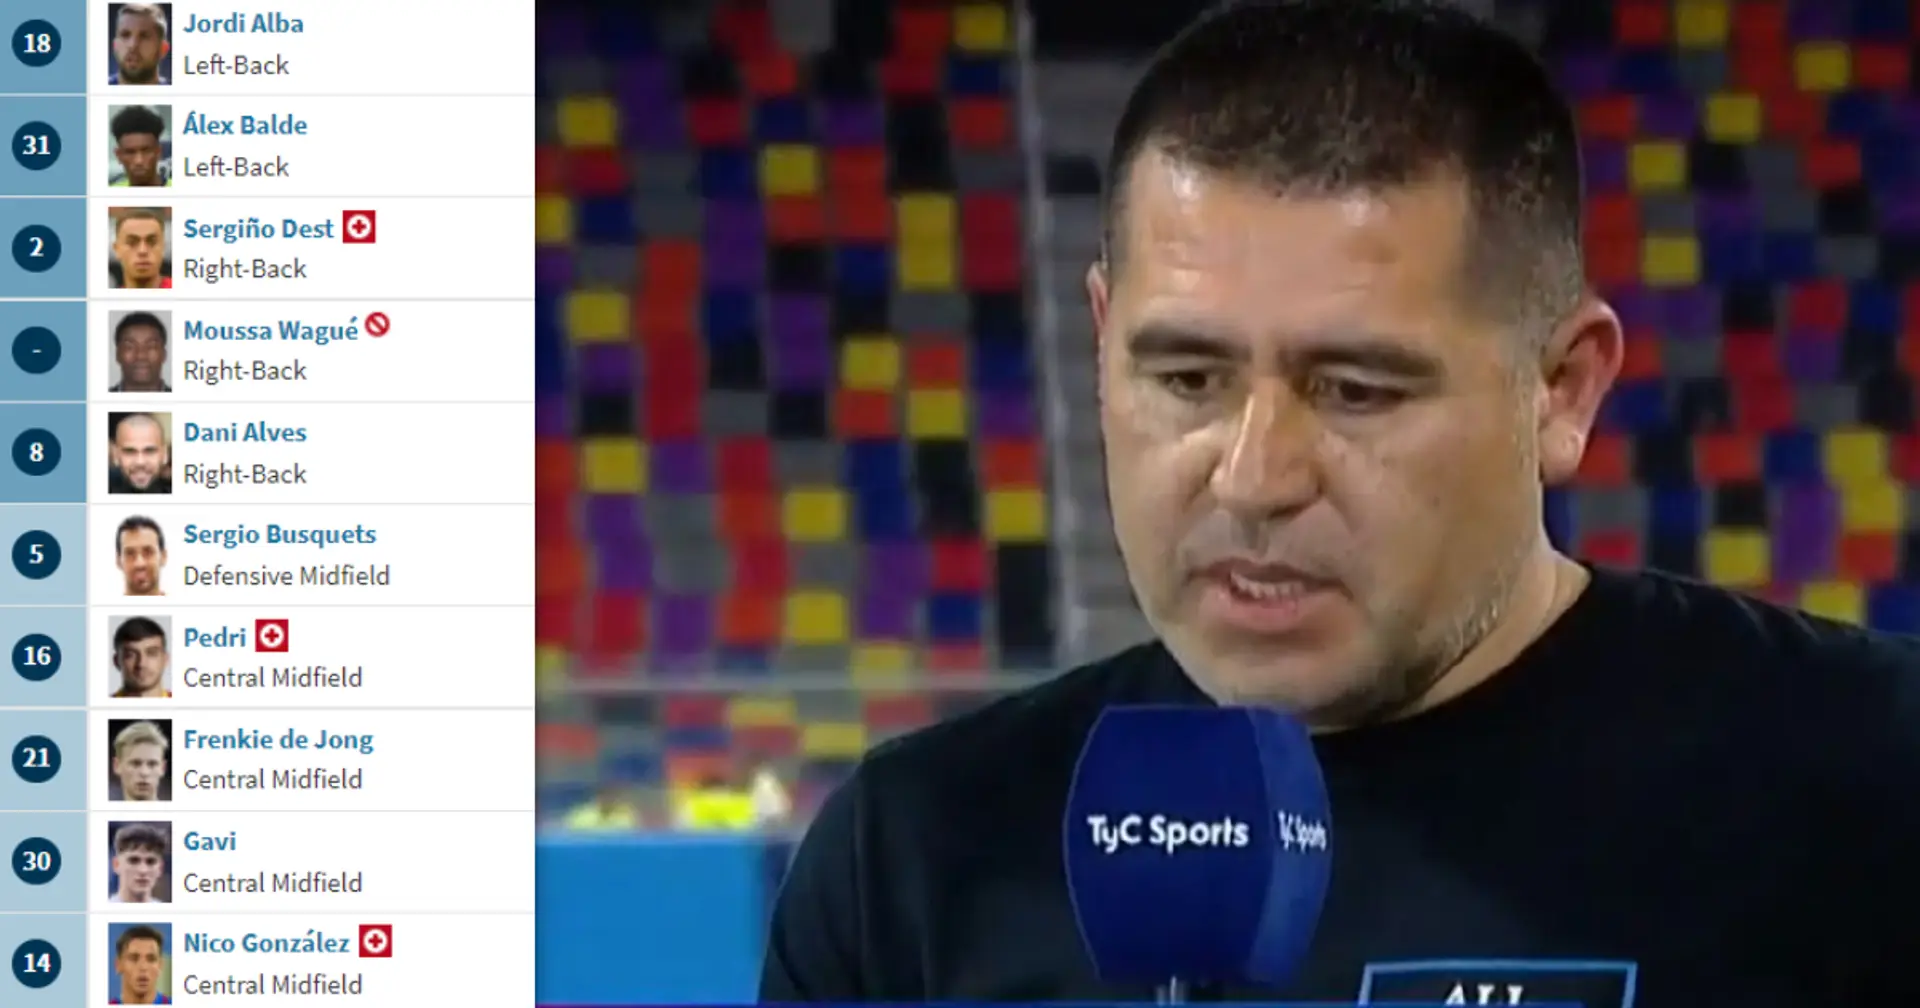 Riquelme names one current Barca player who changed history and 'confused world football'